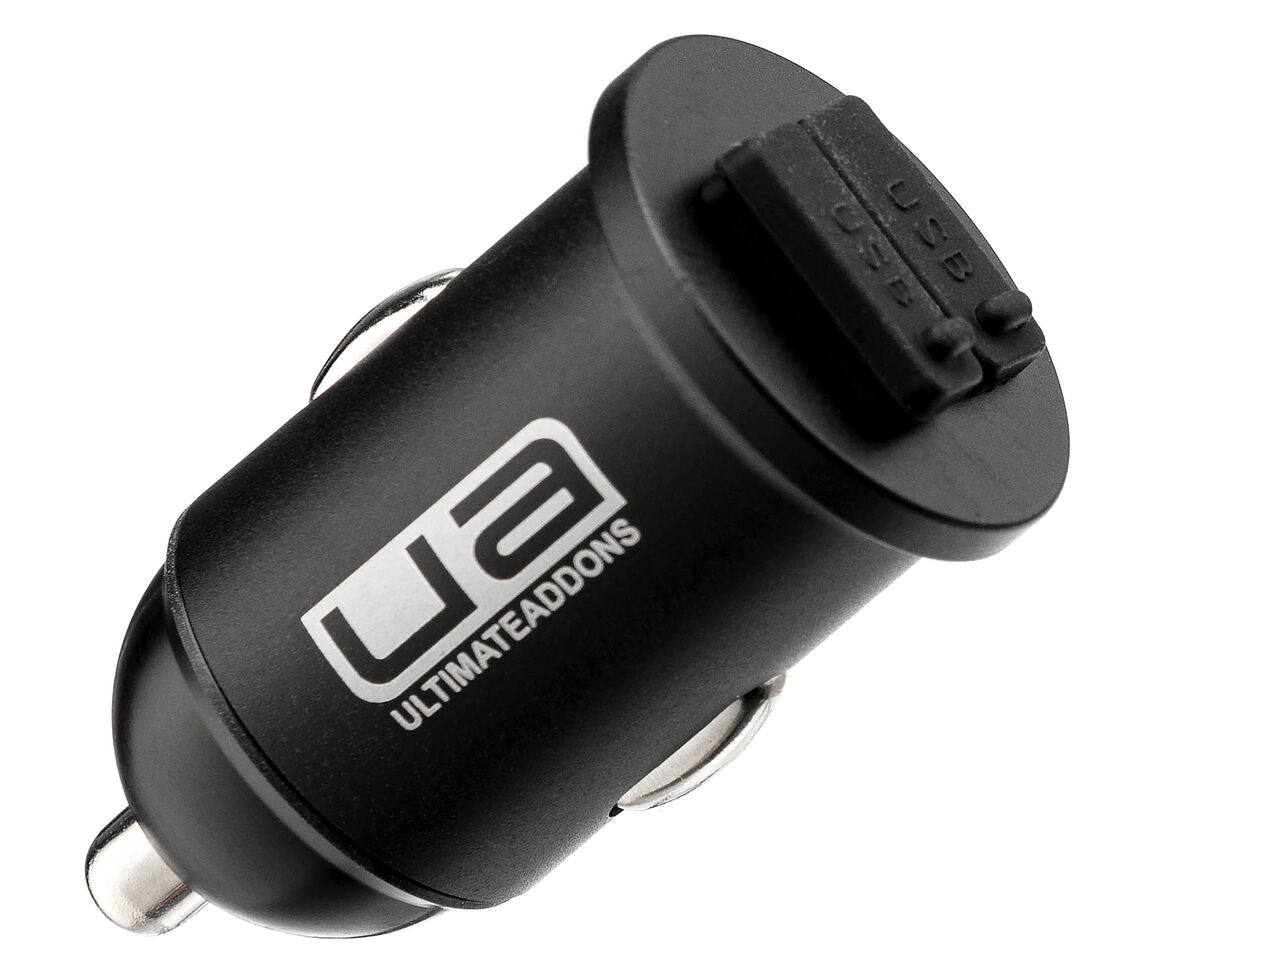 12V 4.8 AMP MOTORCYCLE MINI DUAL USB CHARGER